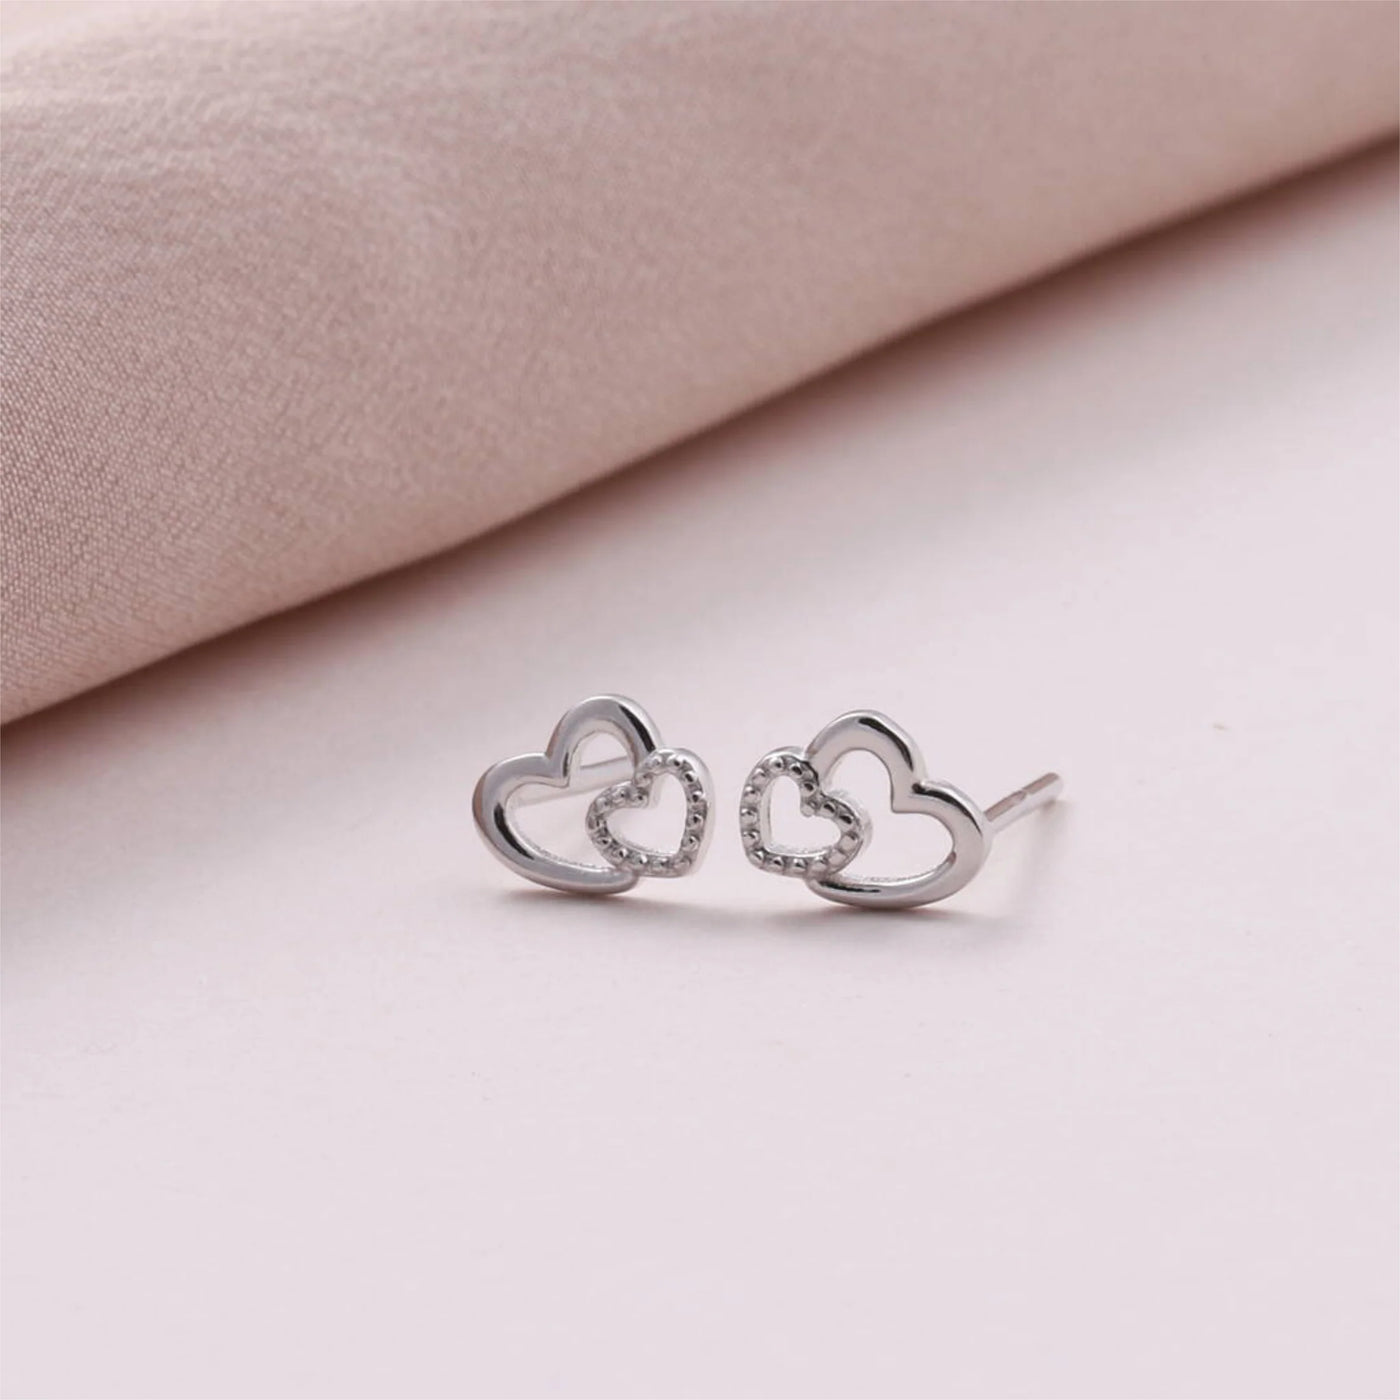 Mum & Daughter - Message in a Bottle - Two Hearts Stud Earrings - Sterling Silver